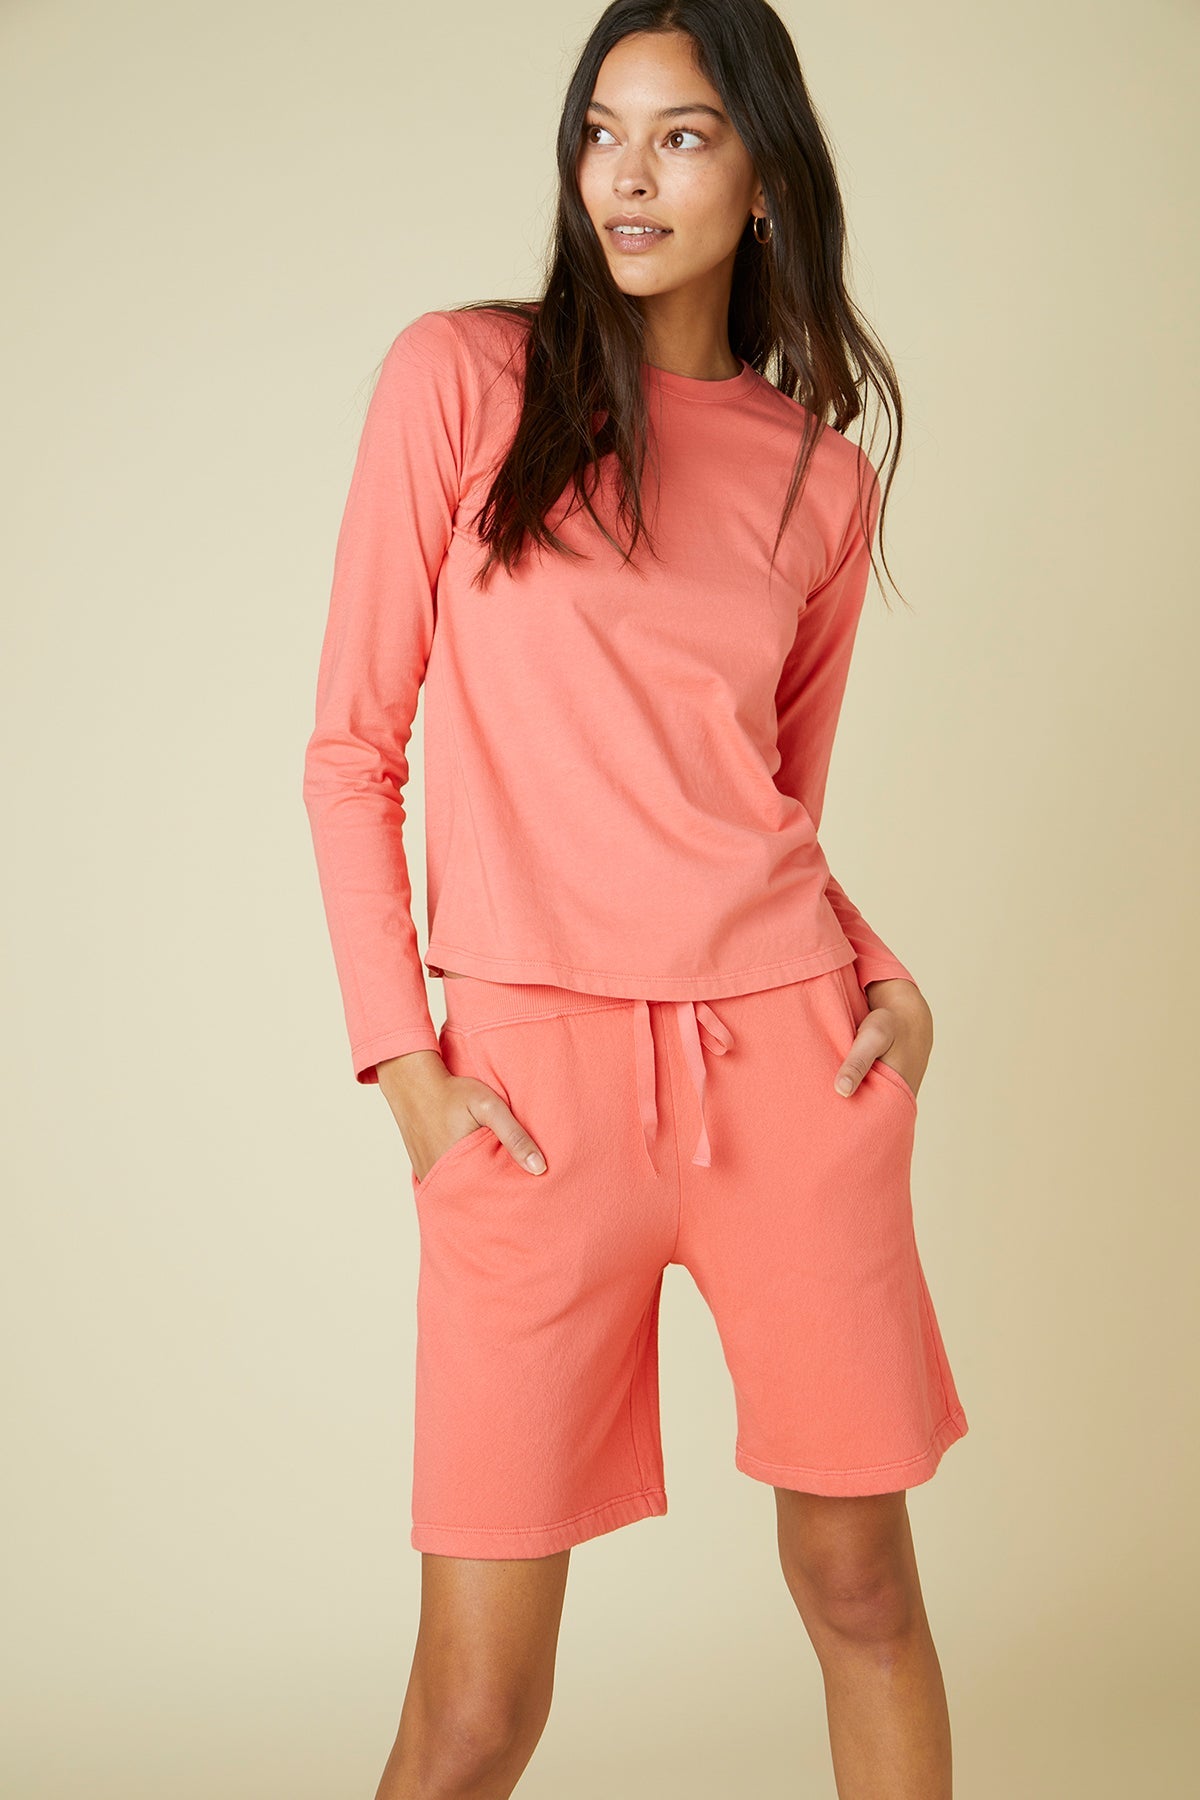 The model is wearing a coral long-sleeved top and Velvet by Jenny Graham Laguna Sweatshorts.-24063592202433